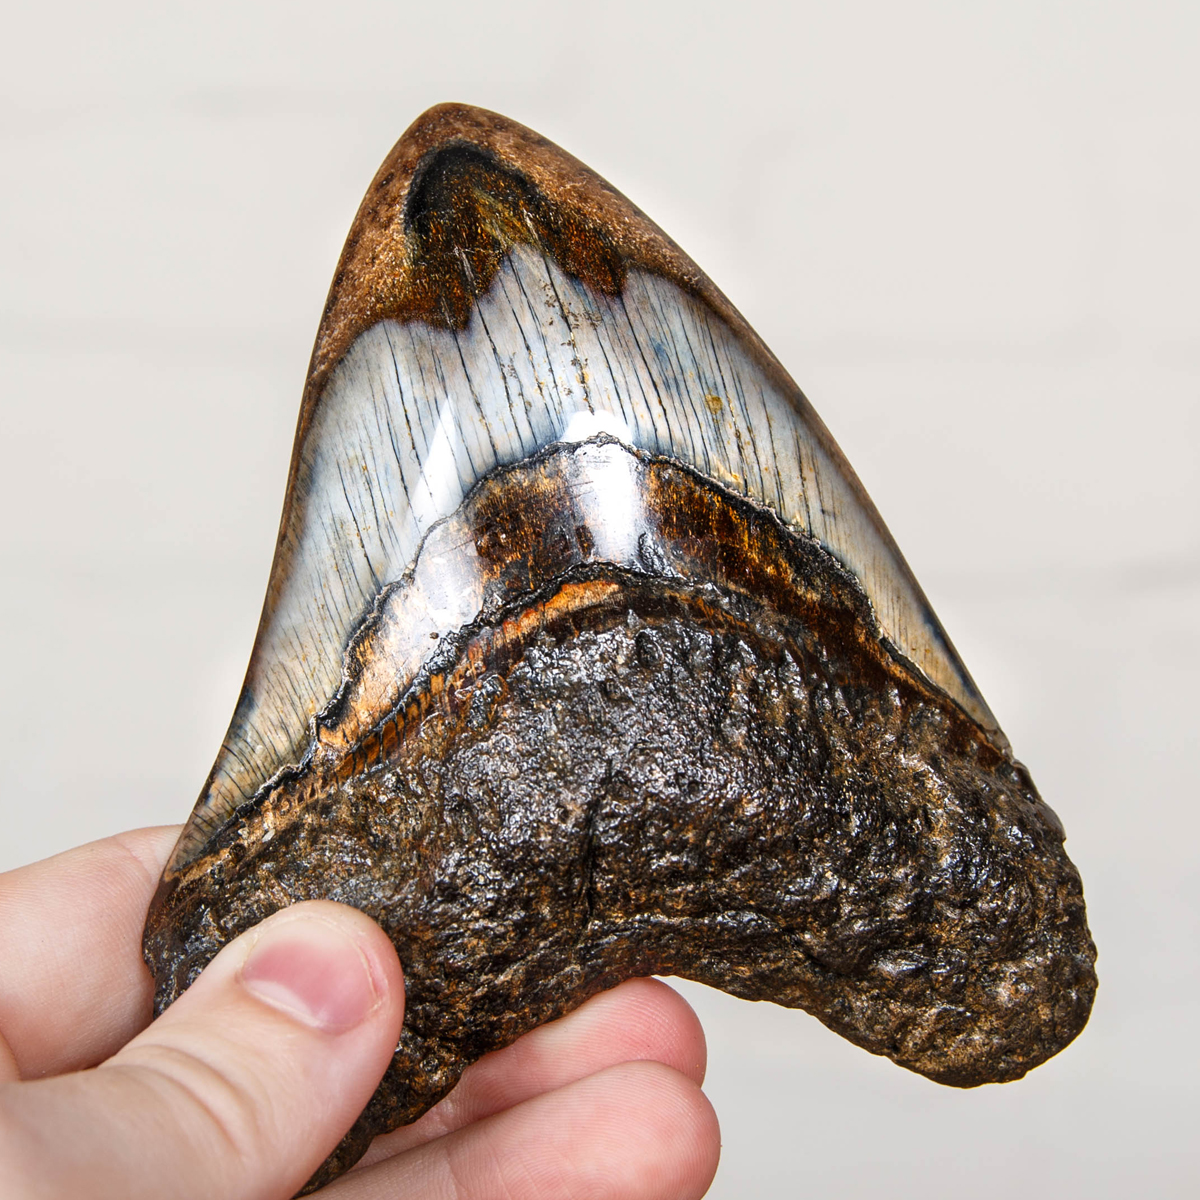 Collector Grade 4.2 Inch Polished Megalodon Shark Tooth Fossil on Stand (Carcharodon megalodon)